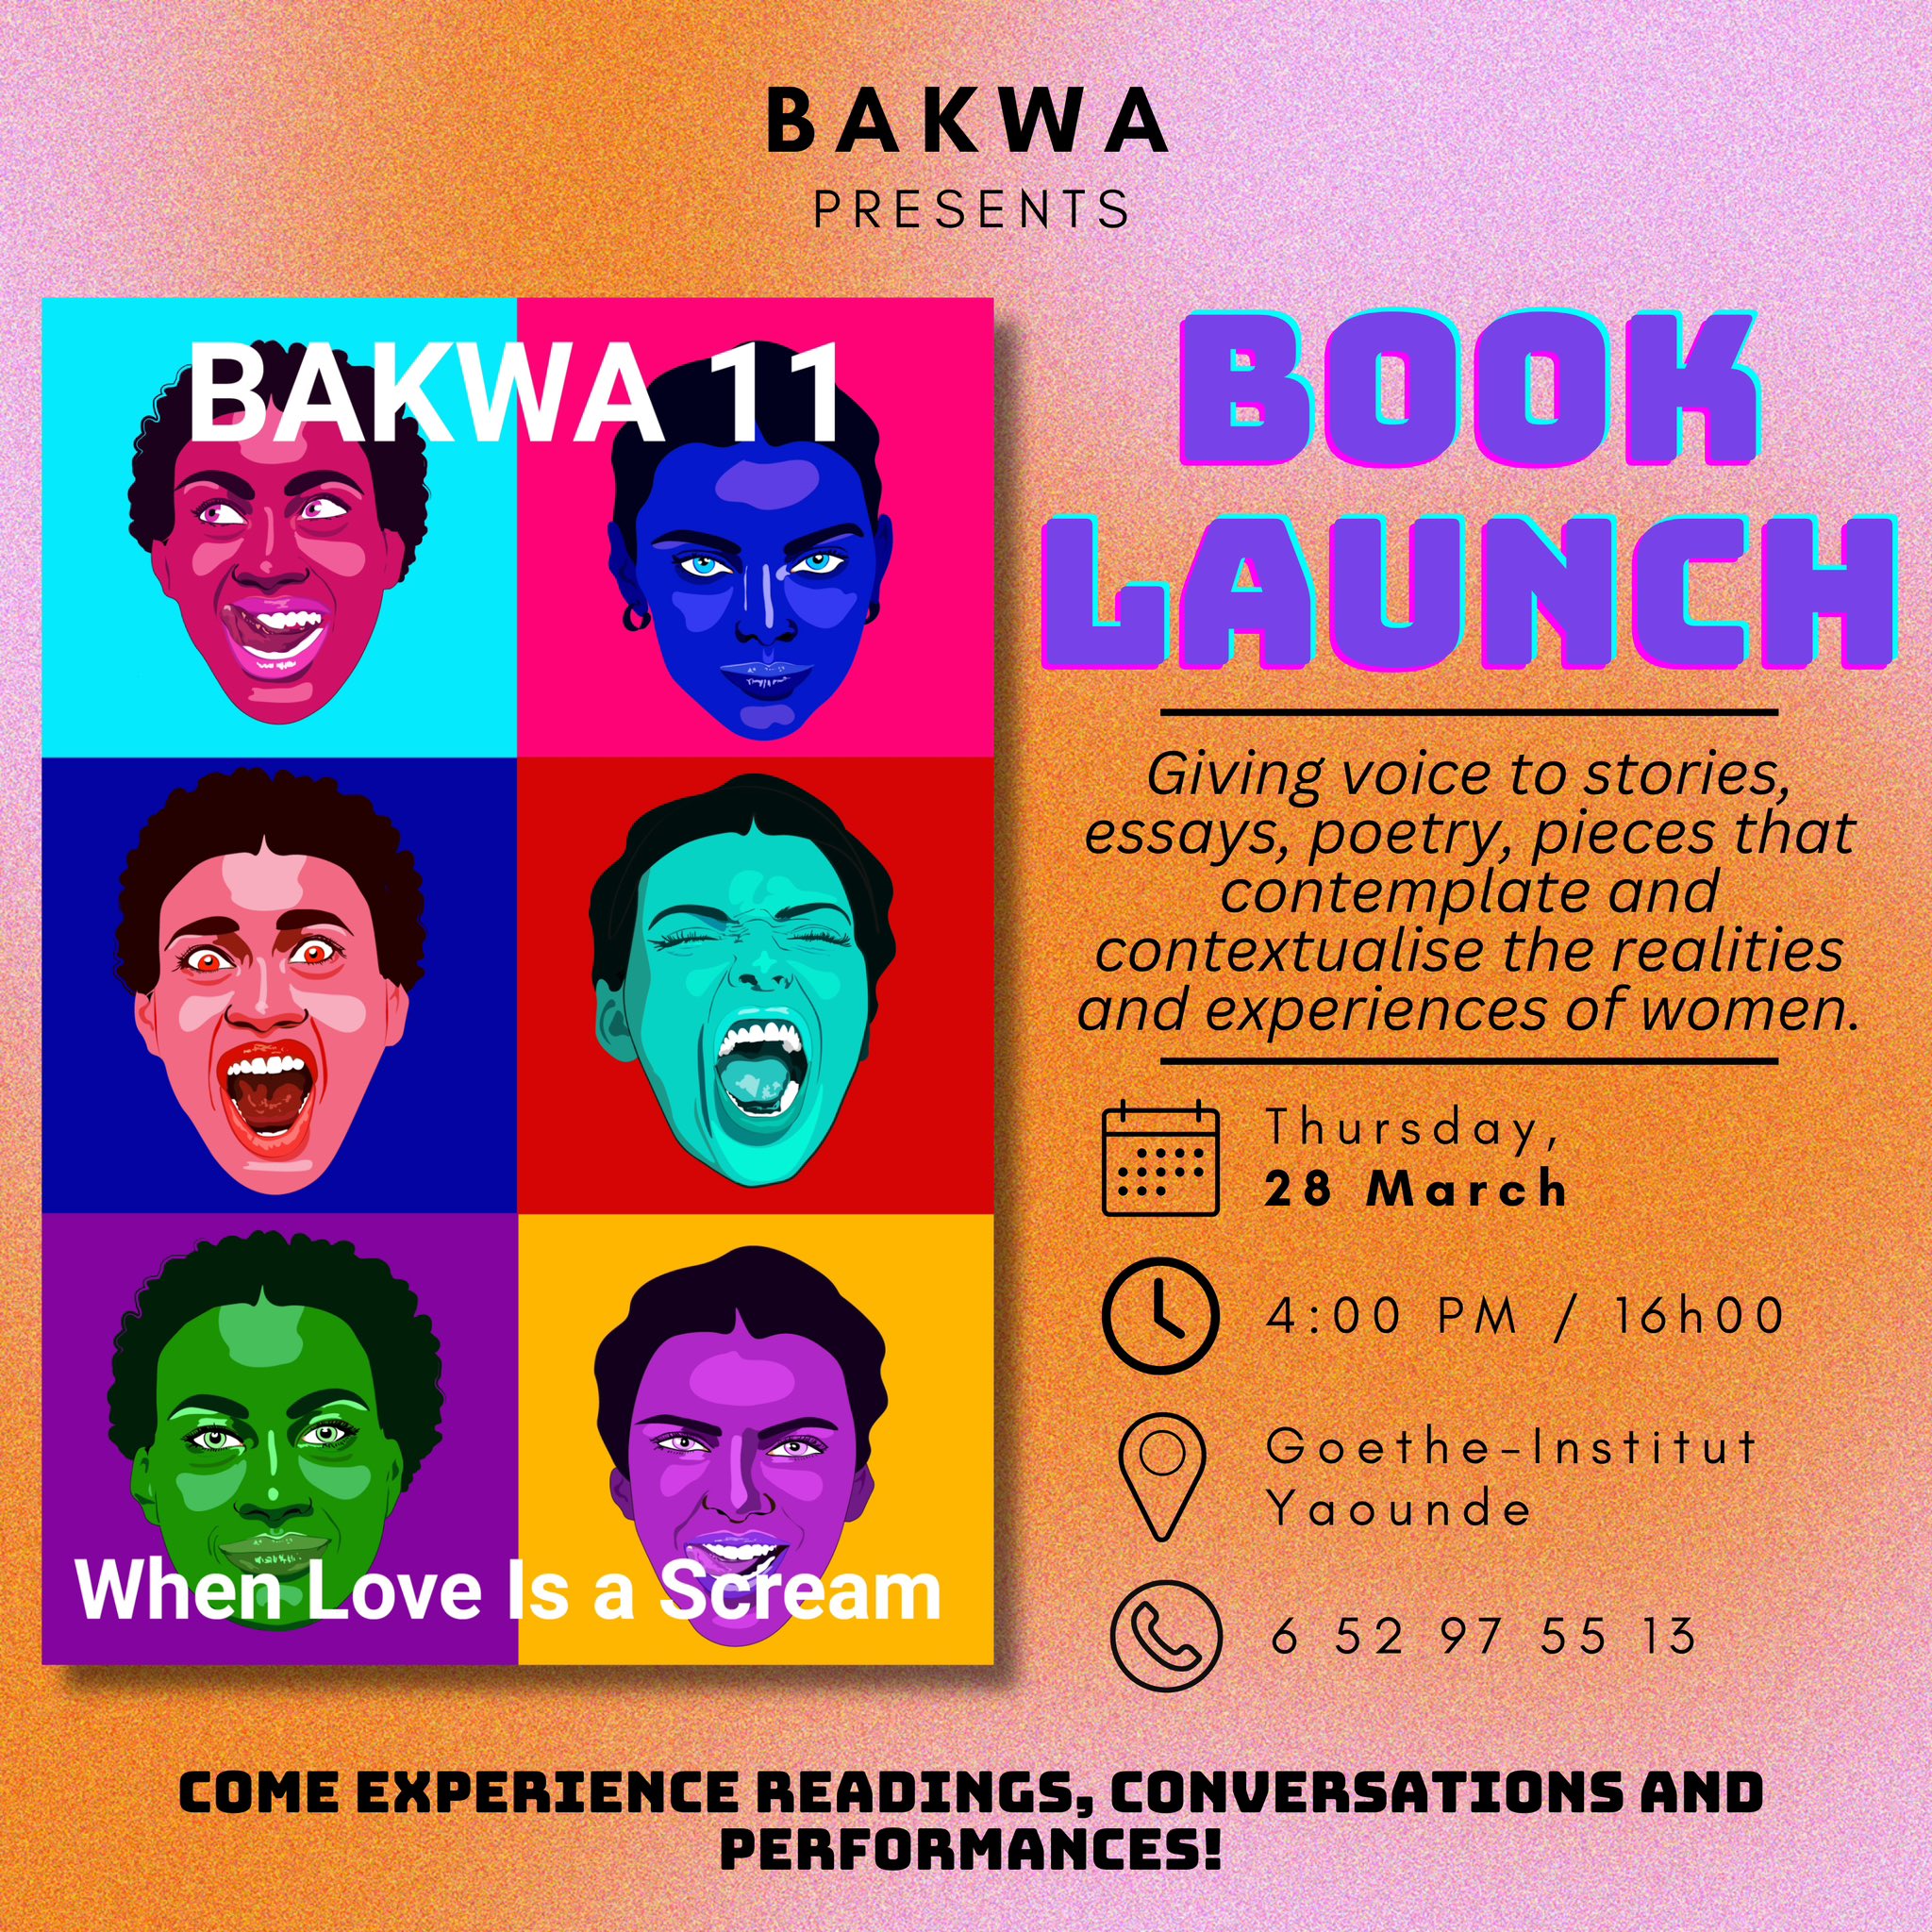 You are currently viewing Bakwa Launches Bakwa 11: When Love Is a Scream